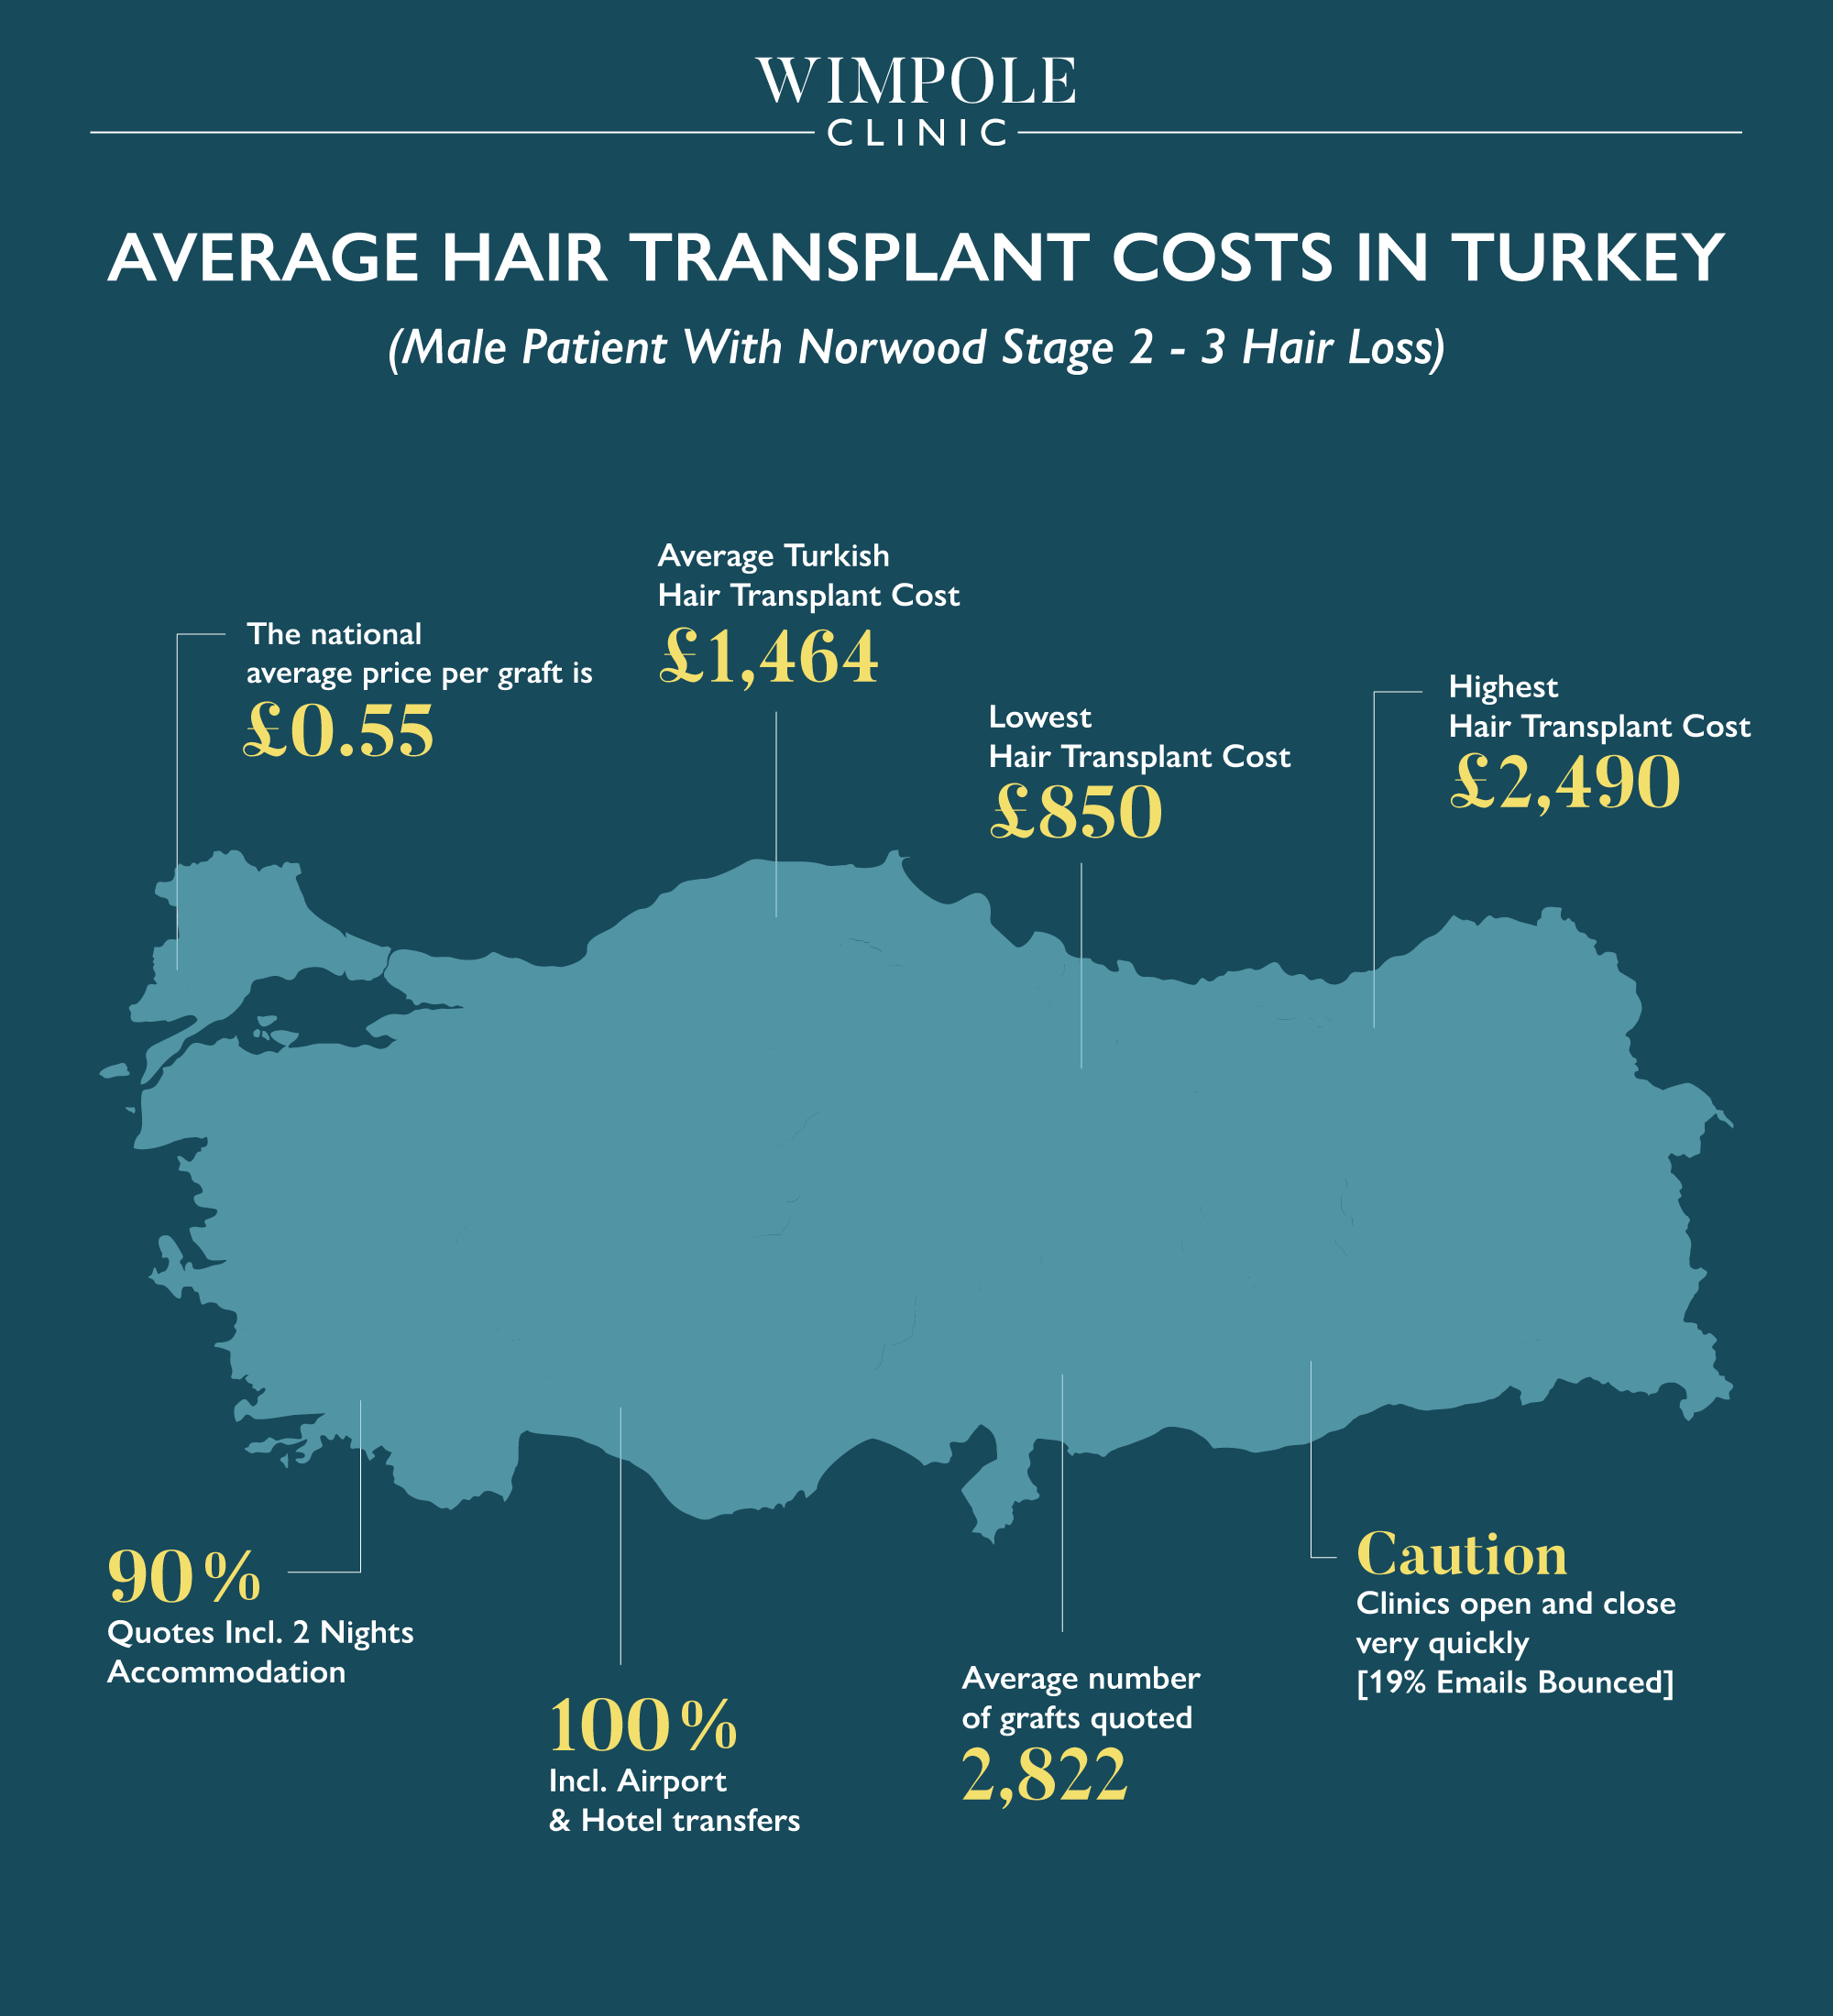 Hair Transplant Costs In Turkey: Is It Worth The Risk? | Wimpole Clinic